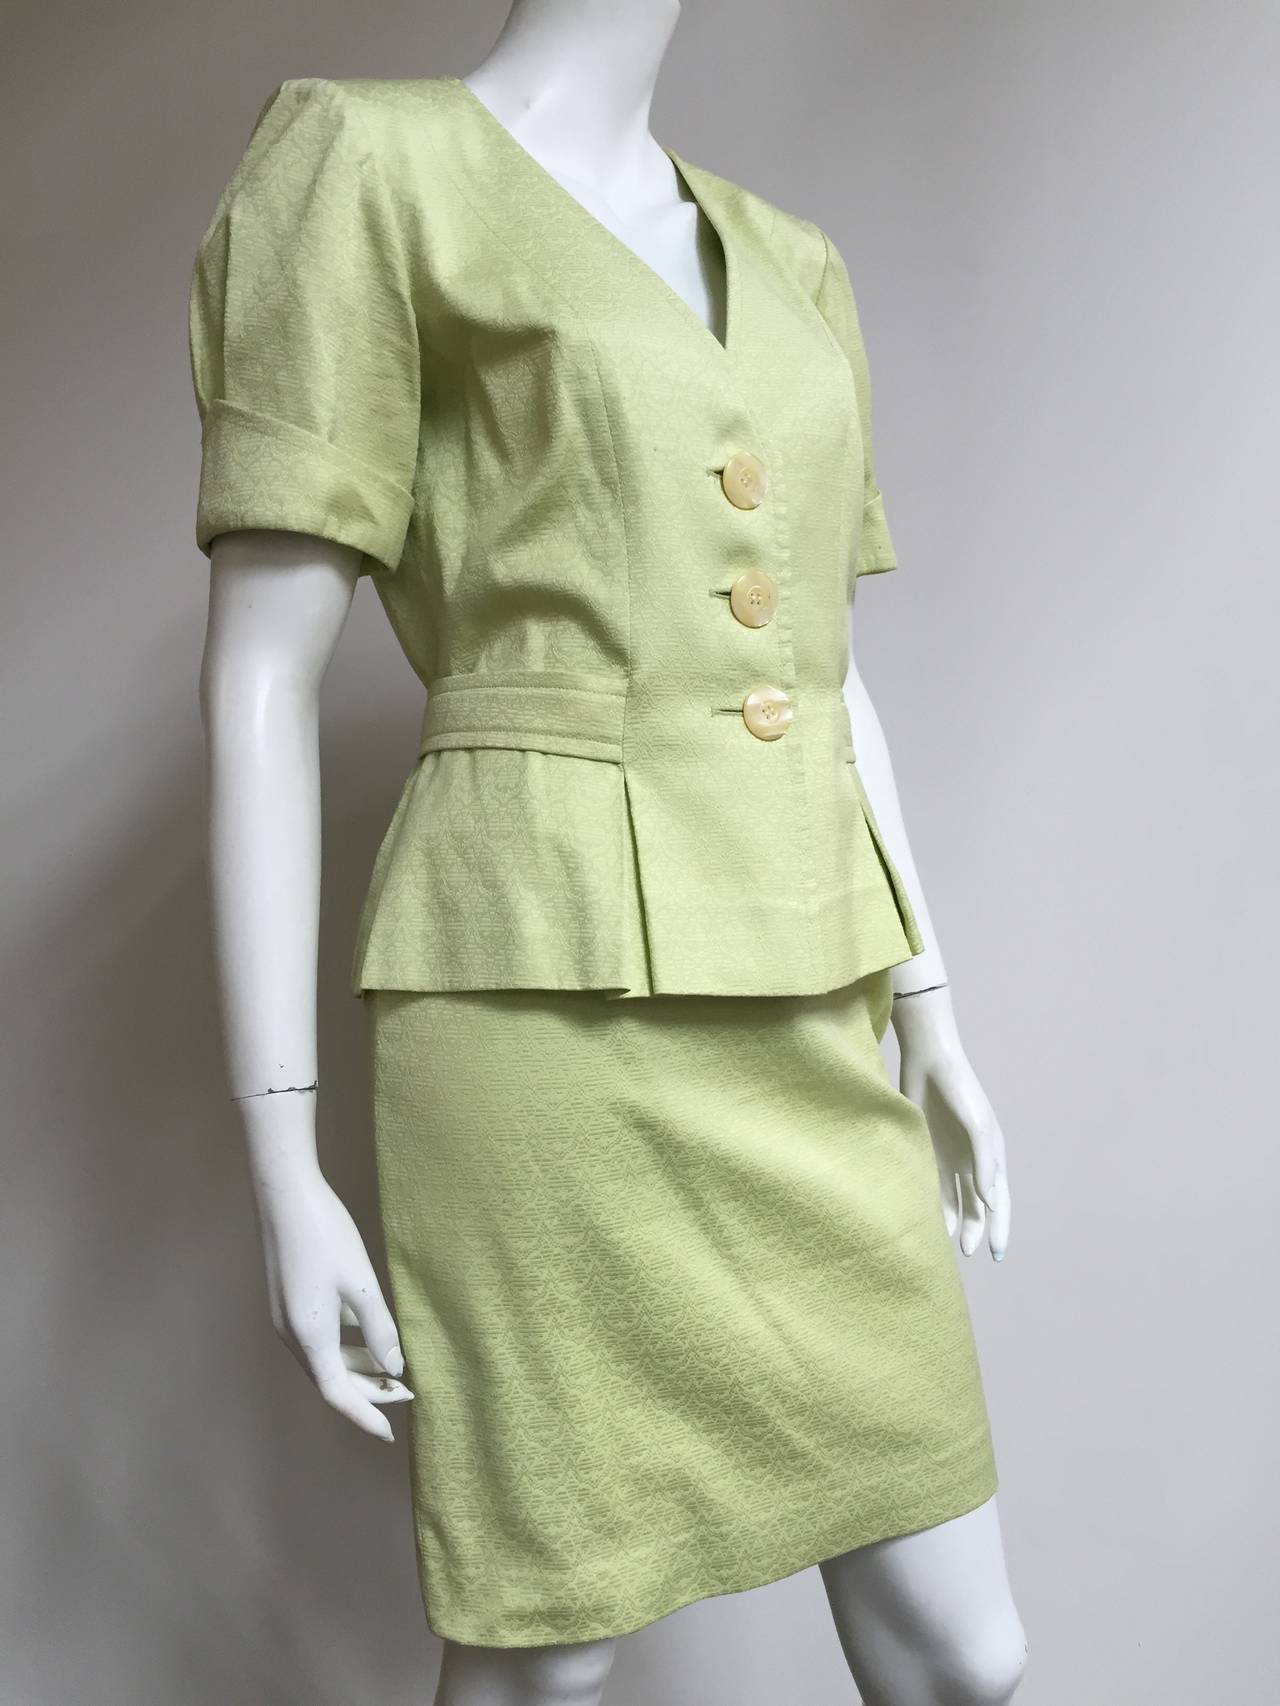 Yves Saint Laurent variation 1980s cotton skirt suit is a USA size 6.  Please see & use measurements provided. Celery color short sleeve three button jacket with front pockets that has button tie on back side. Skirt has side zipper. Made in France